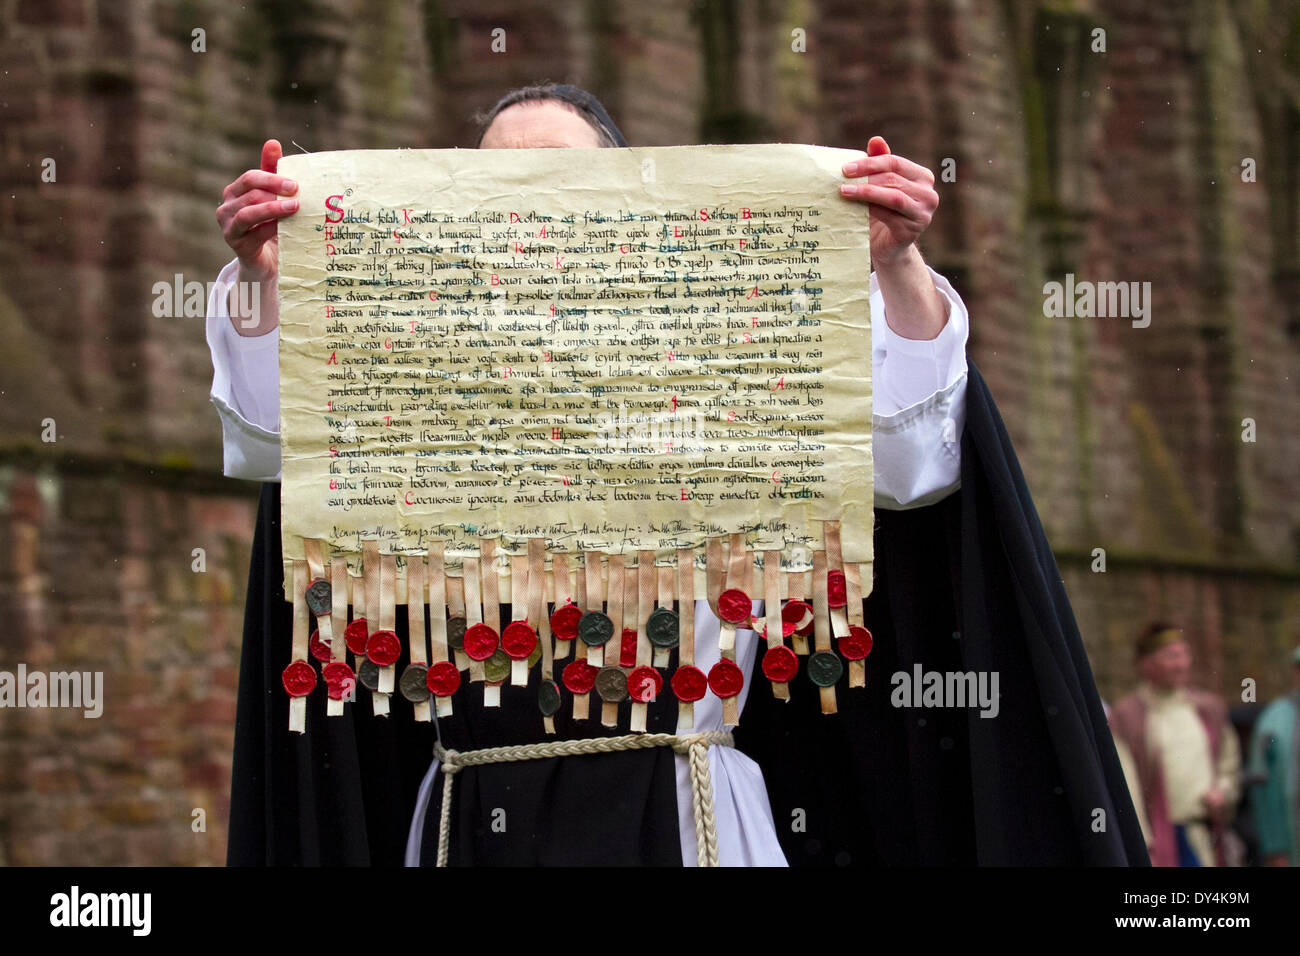 Arbroath, Scotland, UK 6th April, 2014.  Performers and re-enactors, holding the scroll, a letter in Latin submitted to Pope John XXII, dated 6 April 1320, sealed by fifty-one magnates and nobles, intended to confirm Scotland's status as an independent, sovereign state at the Scottish Homecoming event.  'The Declaration of Arbroath' held at Arboath Abbey where the Nobles of Scotland, assembled in the ruins of Arbroath Abbey to commemorate the signing of the Declaration of Arbroath giving Scotland independence in 1320. Stock Photo